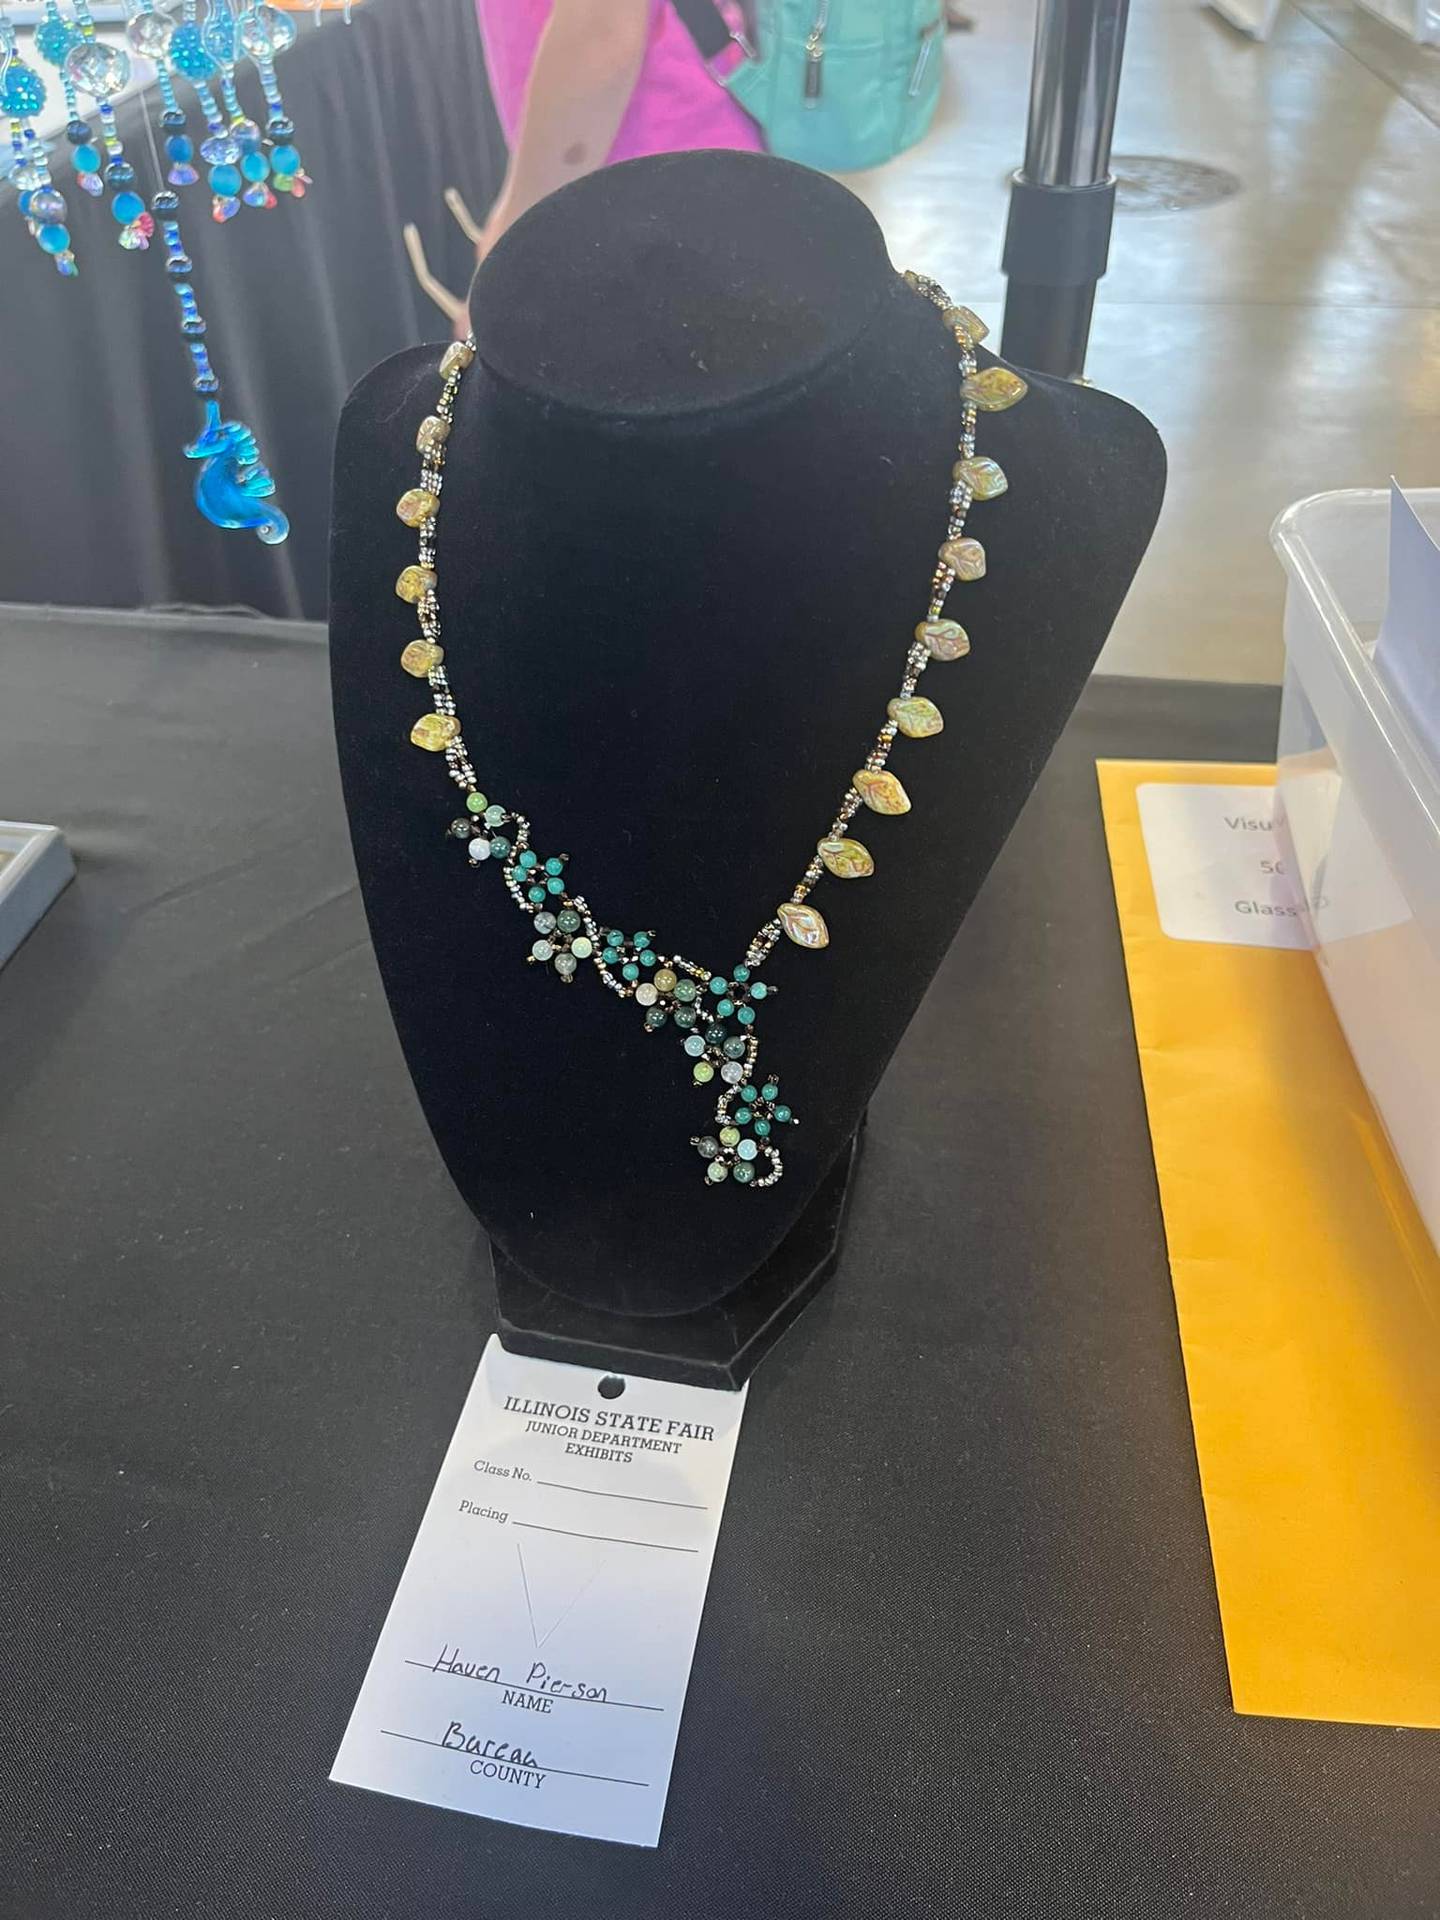 Haven Pierson, Western Winning Wonders 4-H Club, had her Visual Arts: Glass/Plastic project on display in the Orr Building at the Illinois State Fair received Reserve honors.